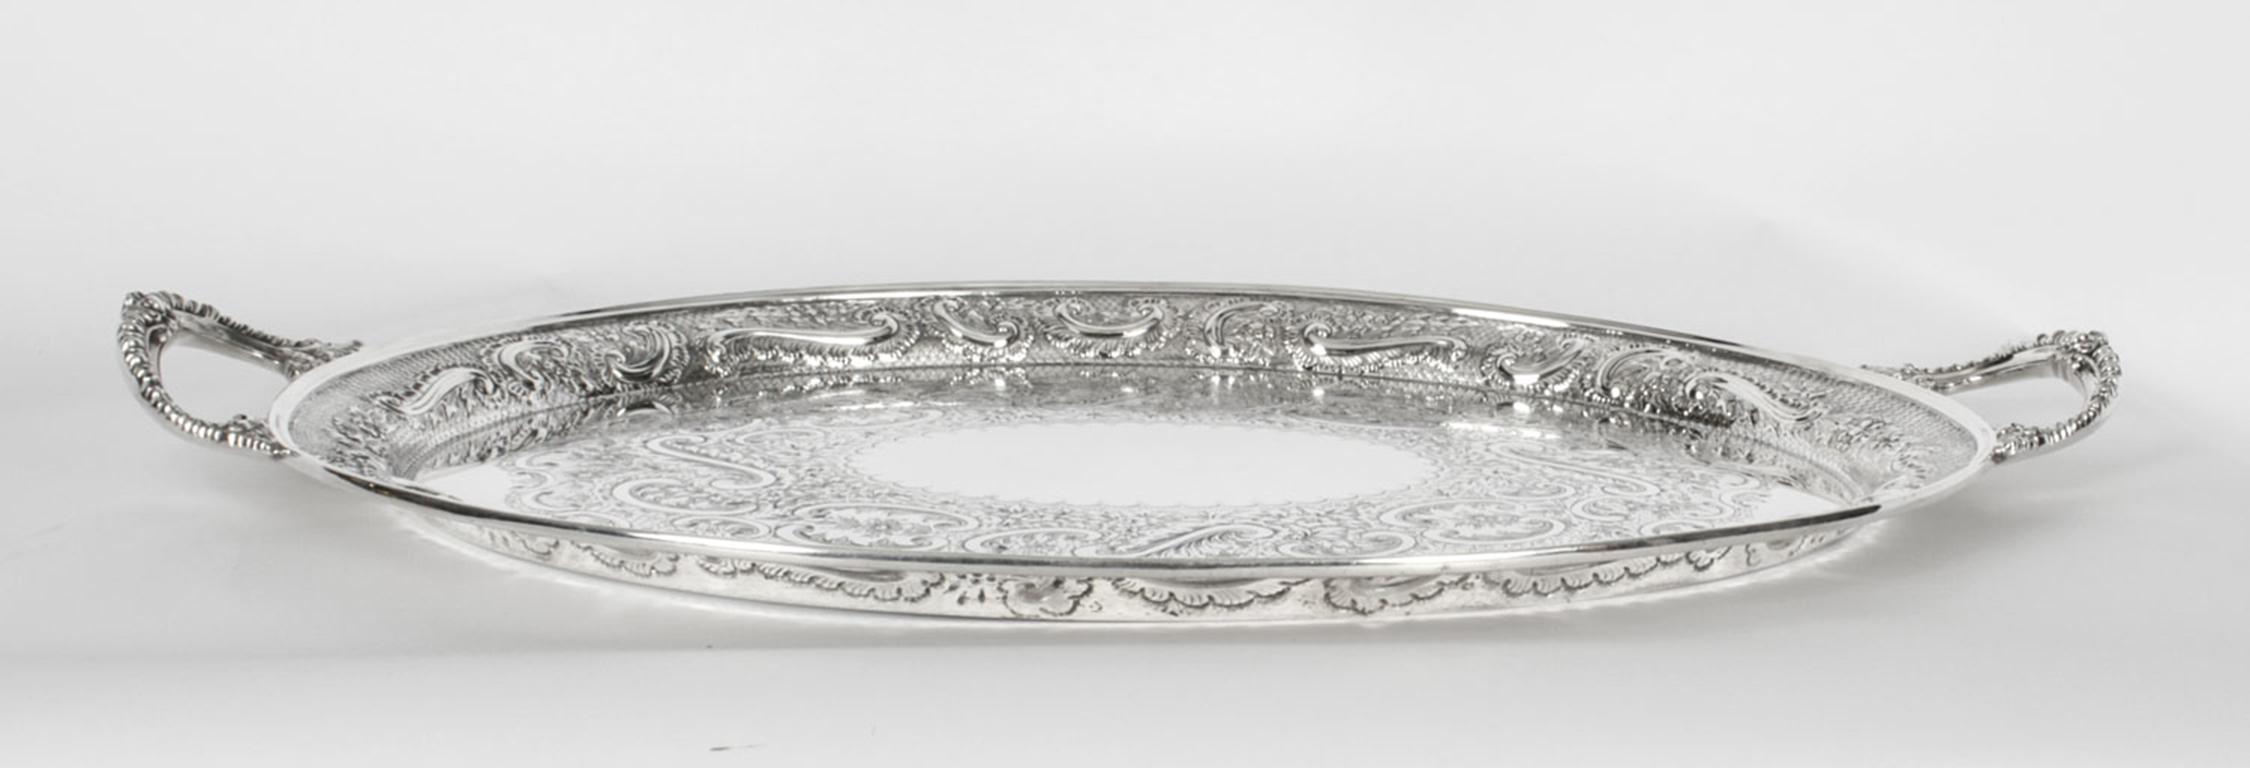 Antique Oval Victorian Silver Plated Tray by Mappin & Webb, 19th Century 7